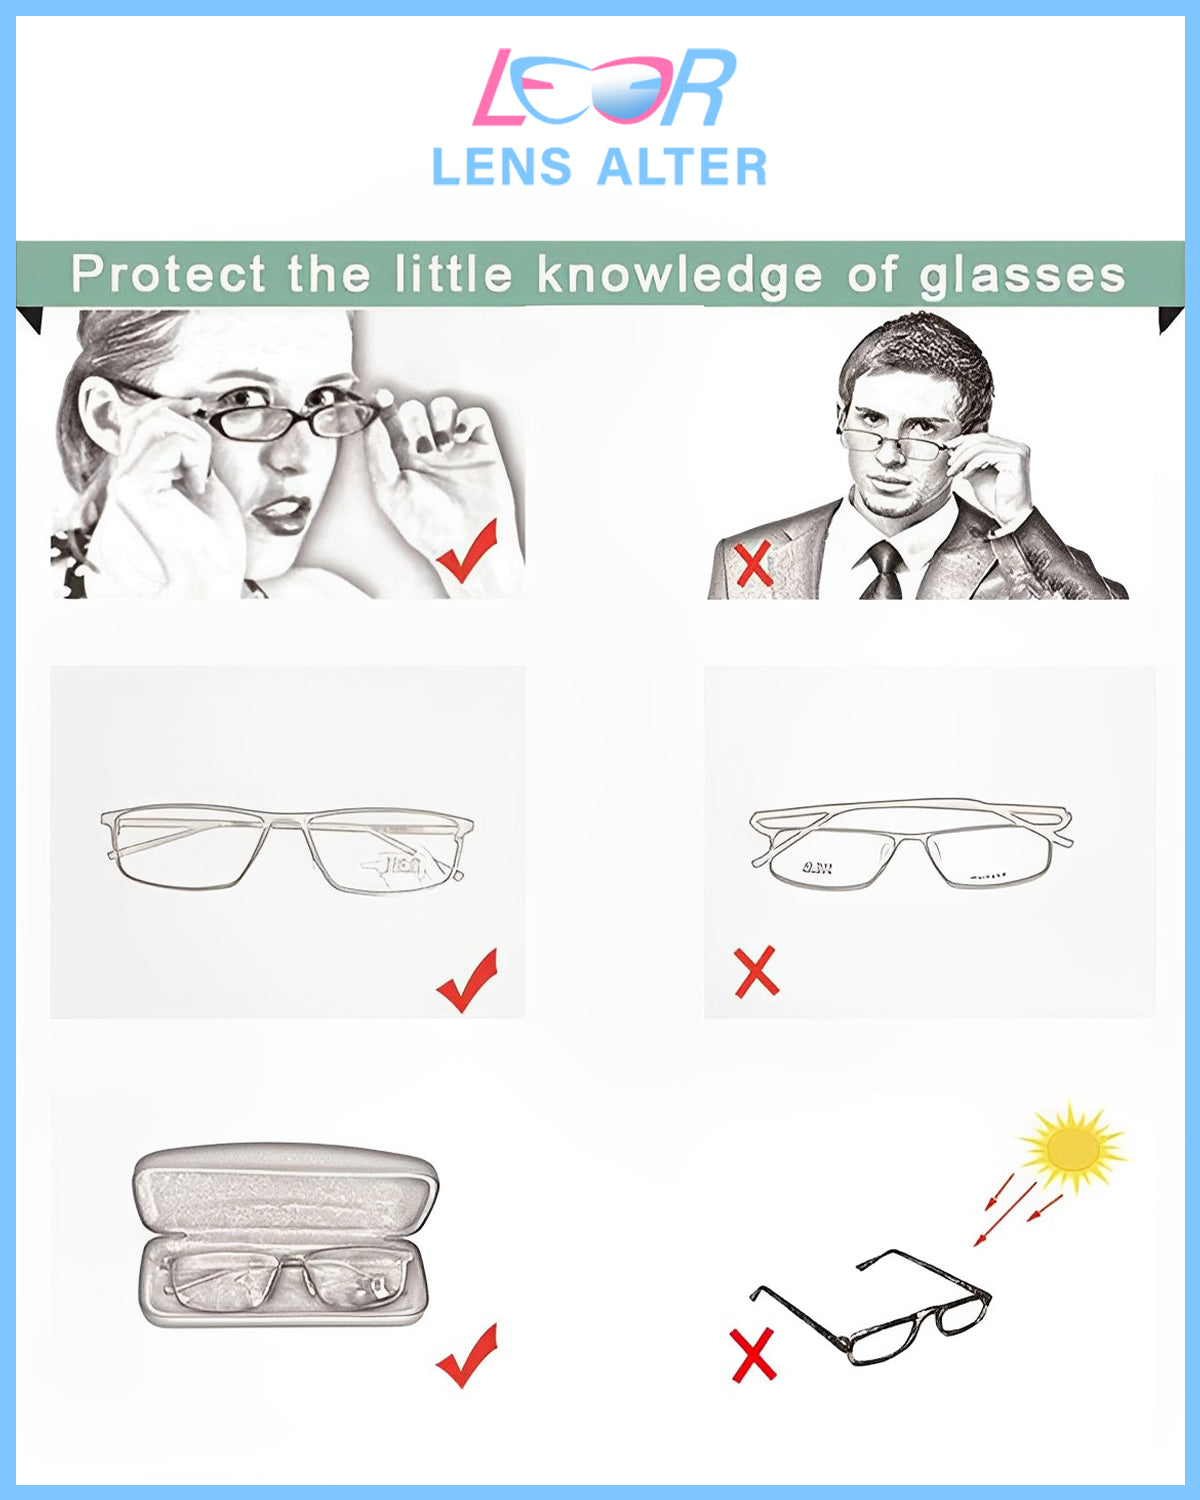 How to Take Care of Your Photochromic Glasses